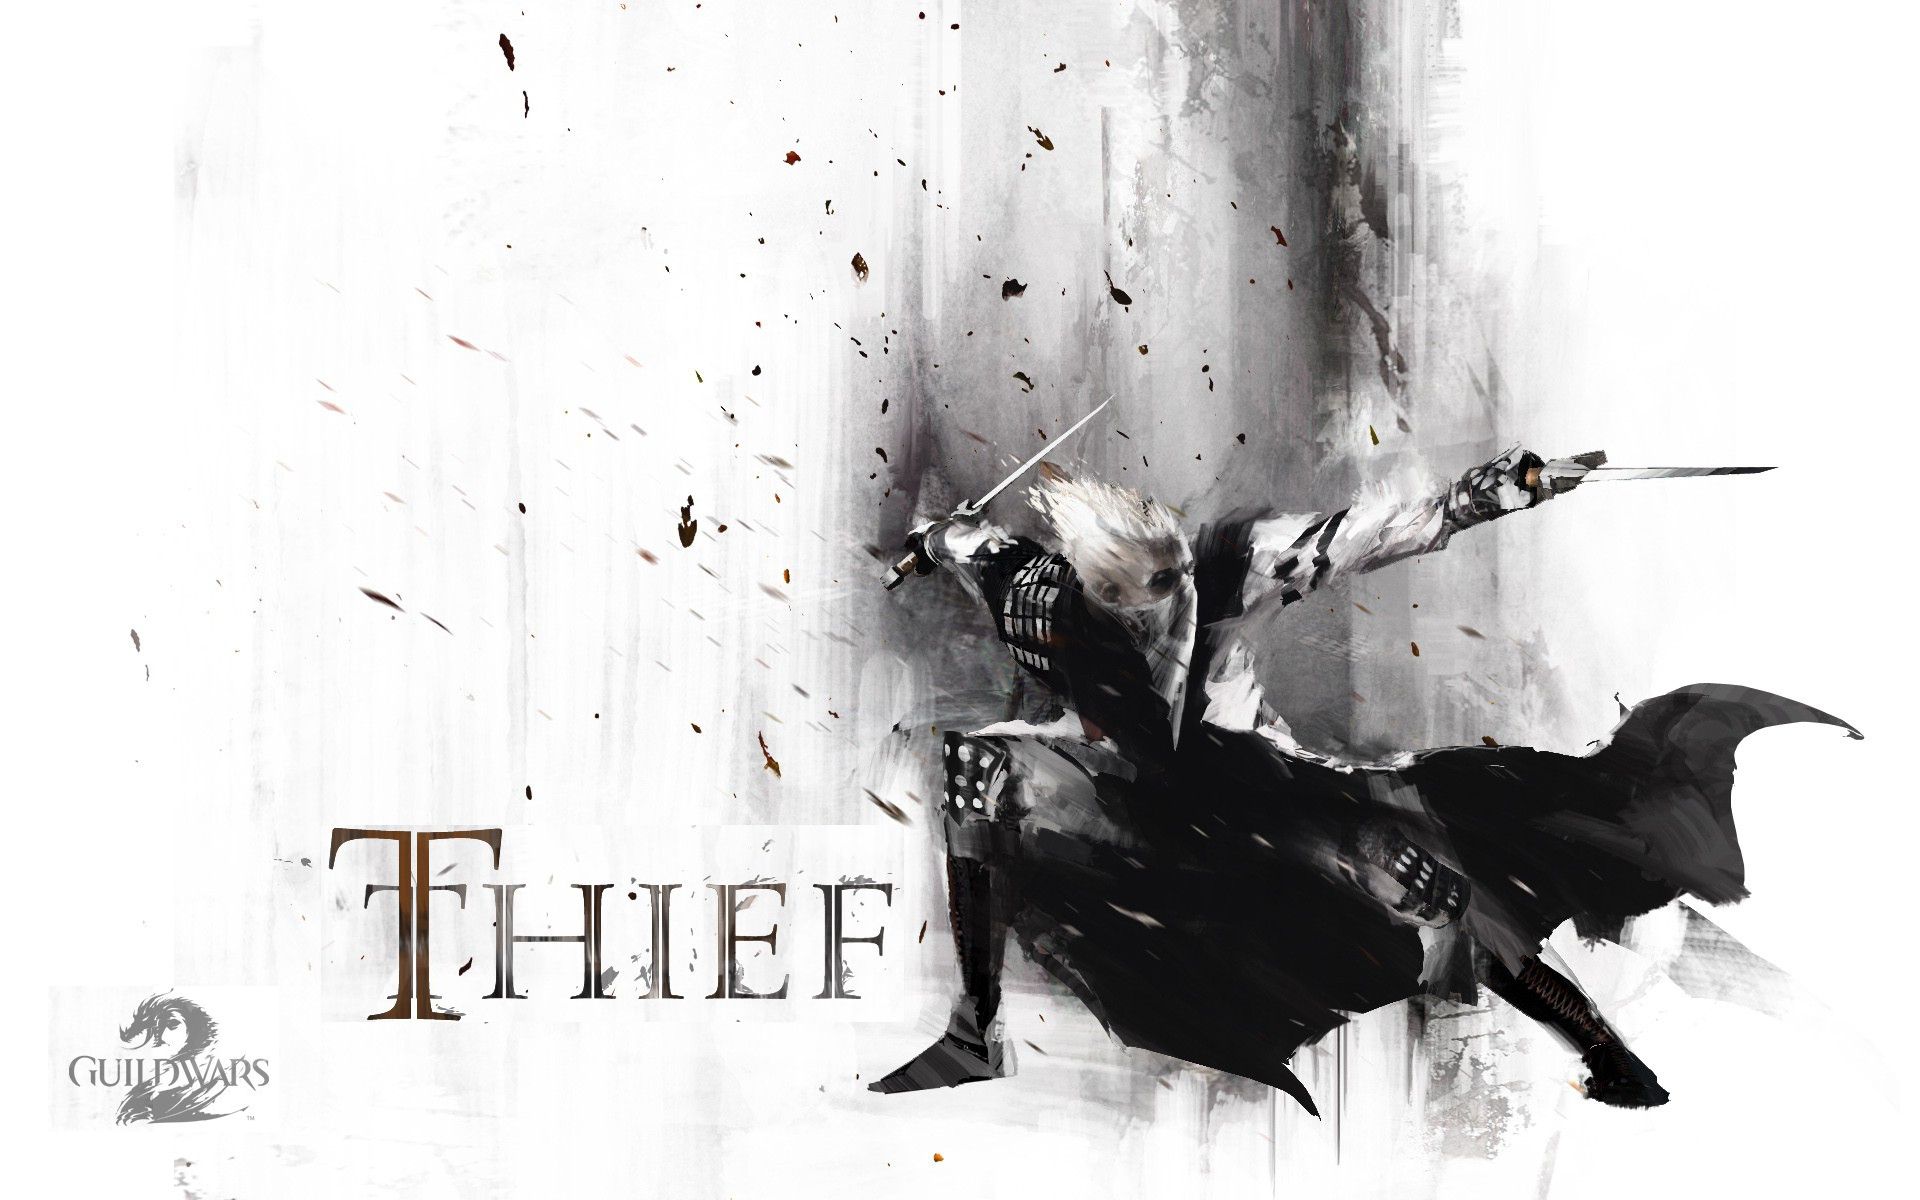 The THIEF Guild War 2 desktop wallpaper with a captivating scene from the popular video game Guild Wars 2.